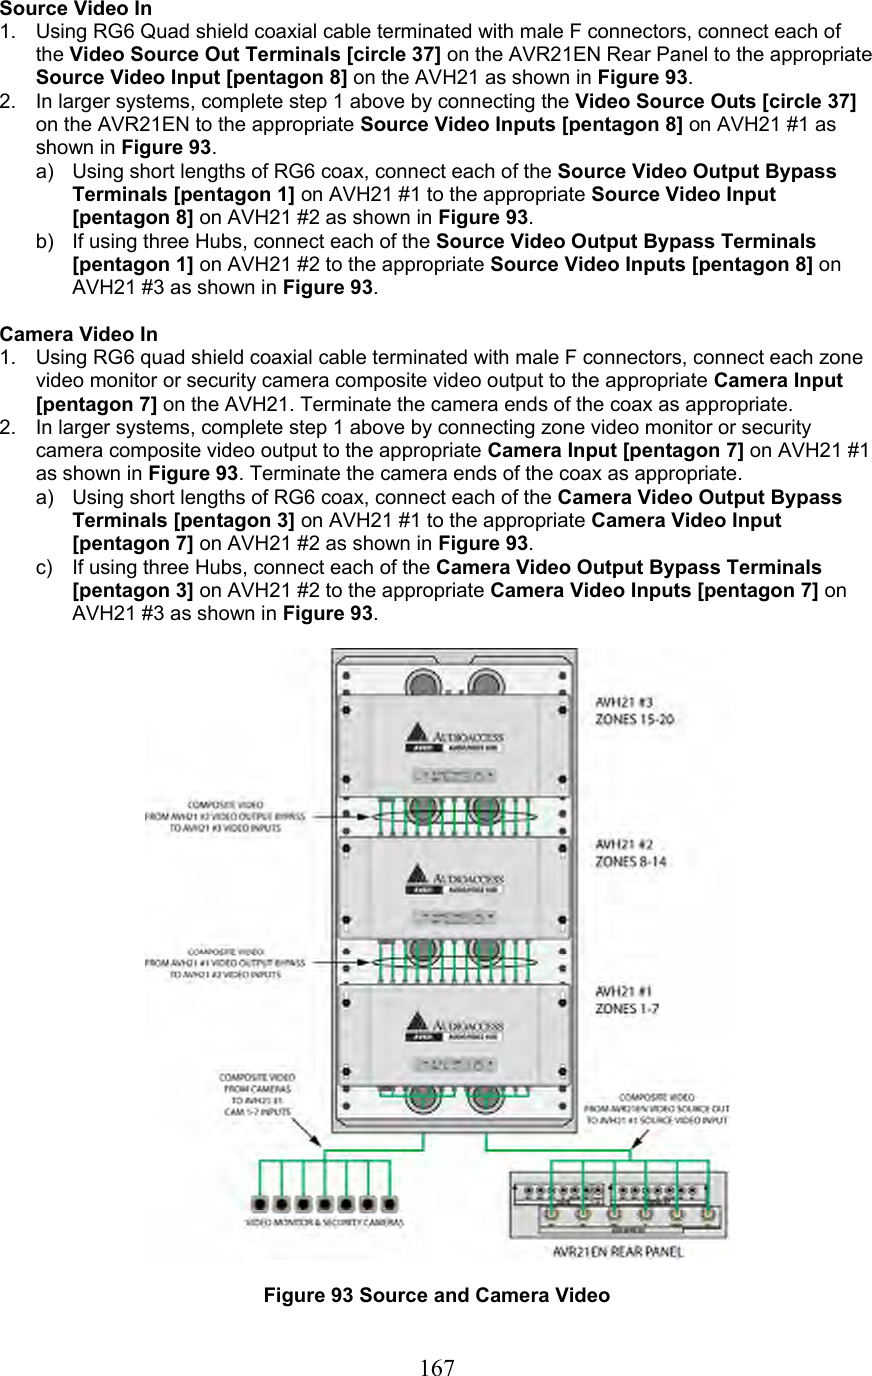  167Source Video In 1.  Using RG6 Quad shield coaxial cable terminated with male F connectors, connect each of the Video Source Out Terminals [circle 37] on the AVR21EN Rear Panel to the appropriate Source Video Input [pentagon 8] on the AVH21 as shown in Figure 93. 2.  In larger systems, complete step 1 above by connecting the Video Source Outs [circle 37] on the AVR21EN to the appropriate Source Video Inputs [pentagon 8] on AVH21 #1 as shown in Figure 93. a)  Using short lengths of RG6 coax, connect each of the Source Video Output Bypass Terminals [pentagon 1] on AVH21 #1 to the appropriate Source Video Input [pentagon 8] on AVH21 #2 as shown in Figure 93. b)  If using three Hubs, connect each of the Source Video Output Bypass Terminals [pentagon 1] on AVH21 #2 to the appropriate Source Video Inputs [pentagon 8] on AVH21 #3 as shown in Figure 93.  Camera Video In 1.  Using RG6 quad shield coaxial cable terminated with male F connectors, connect each zone video monitor or security camera composite video output to the appropriate Camera Input [pentagon 7] on the AVH21. Terminate the camera ends of the coax as appropriate. 2.  In larger systems, complete step 1 above by connecting zone video monitor or security camera composite video output to the appropriate Camera Input [pentagon 7] on AVH21 #1 as shown in Figure 93. Terminate the camera ends of the coax as appropriate. a)  Using short lengths of RG6 coax, connect each of the Camera Video Output Bypass Terminals [pentagon 3] on AVH21 #1 to the appropriate Camera Video Input [pentagon 7] on AVH21 #2 as shown in Figure 93. c)  If using three Hubs, connect each of the Camera Video Output Bypass Terminals [pentagon 3] on AVH21 #2 to the appropriate Camera Video Inputs [pentagon 7] on AVH21 #3 as shown in Figure 93.    Figure 93 Source and Camera Video 